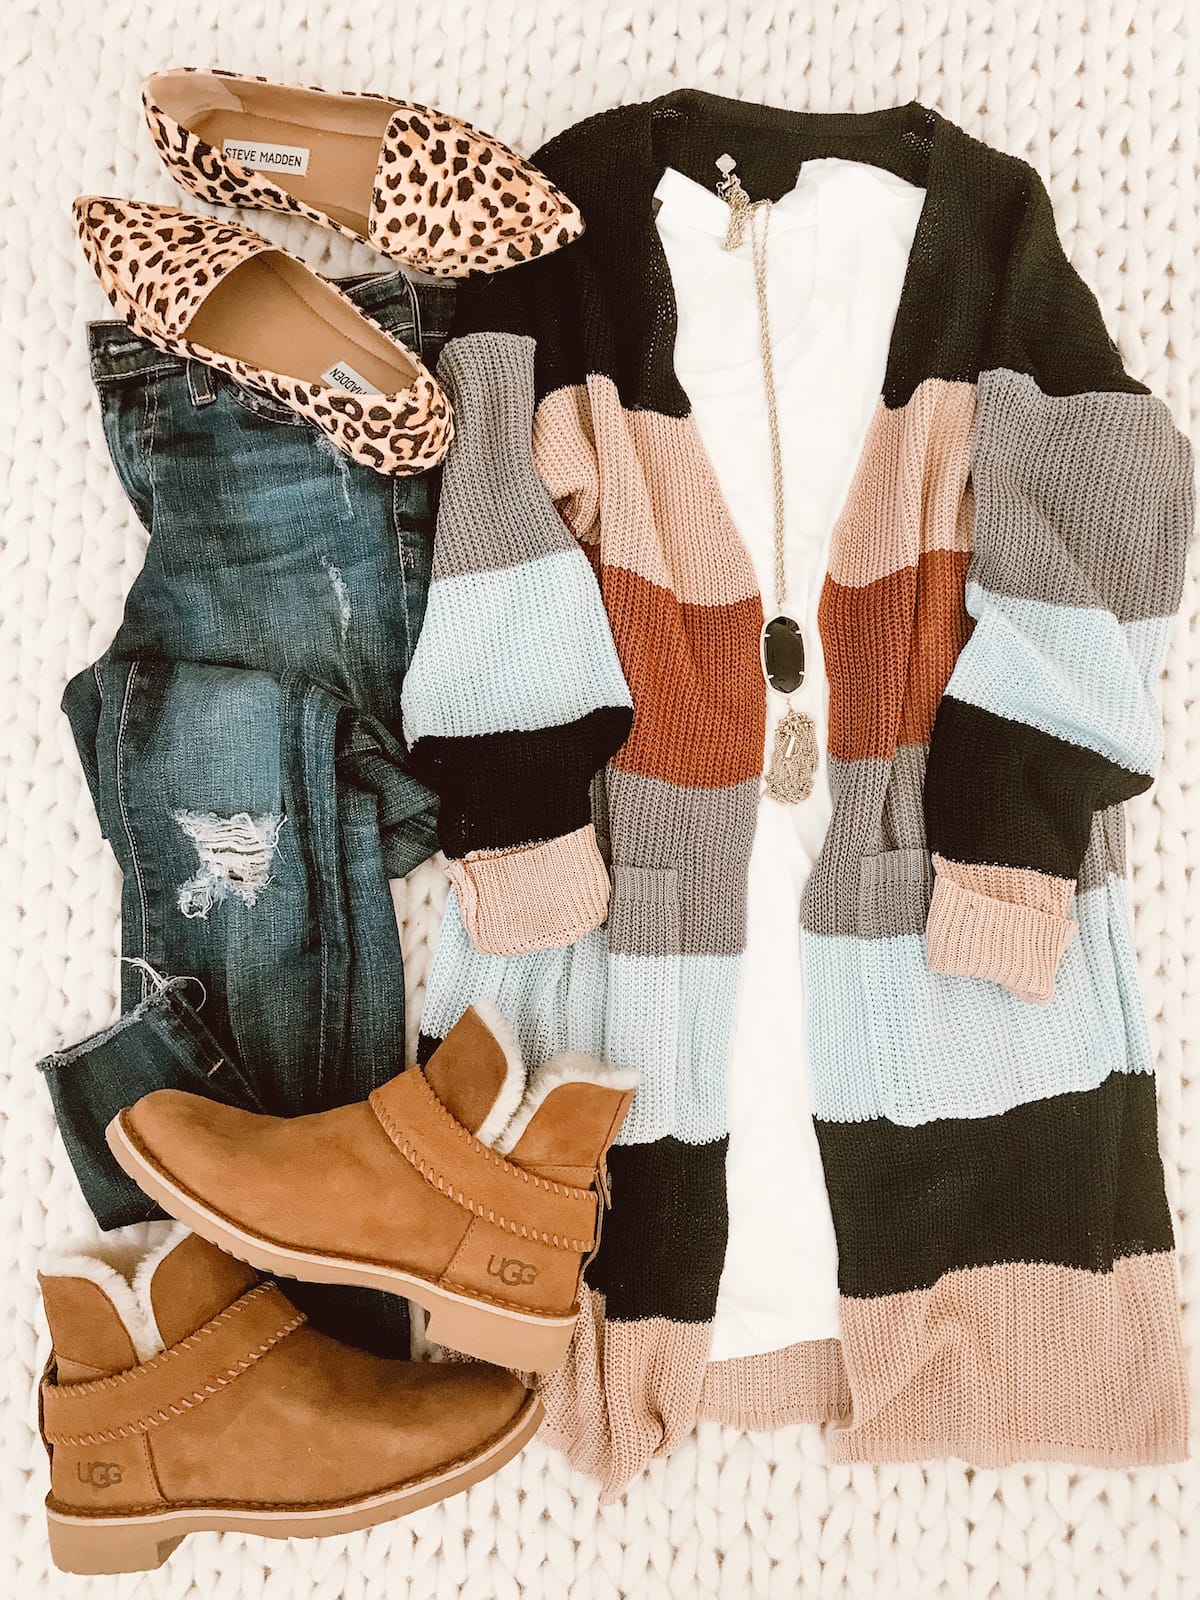 Striped cardigan with jeans and Ugg booties (2)